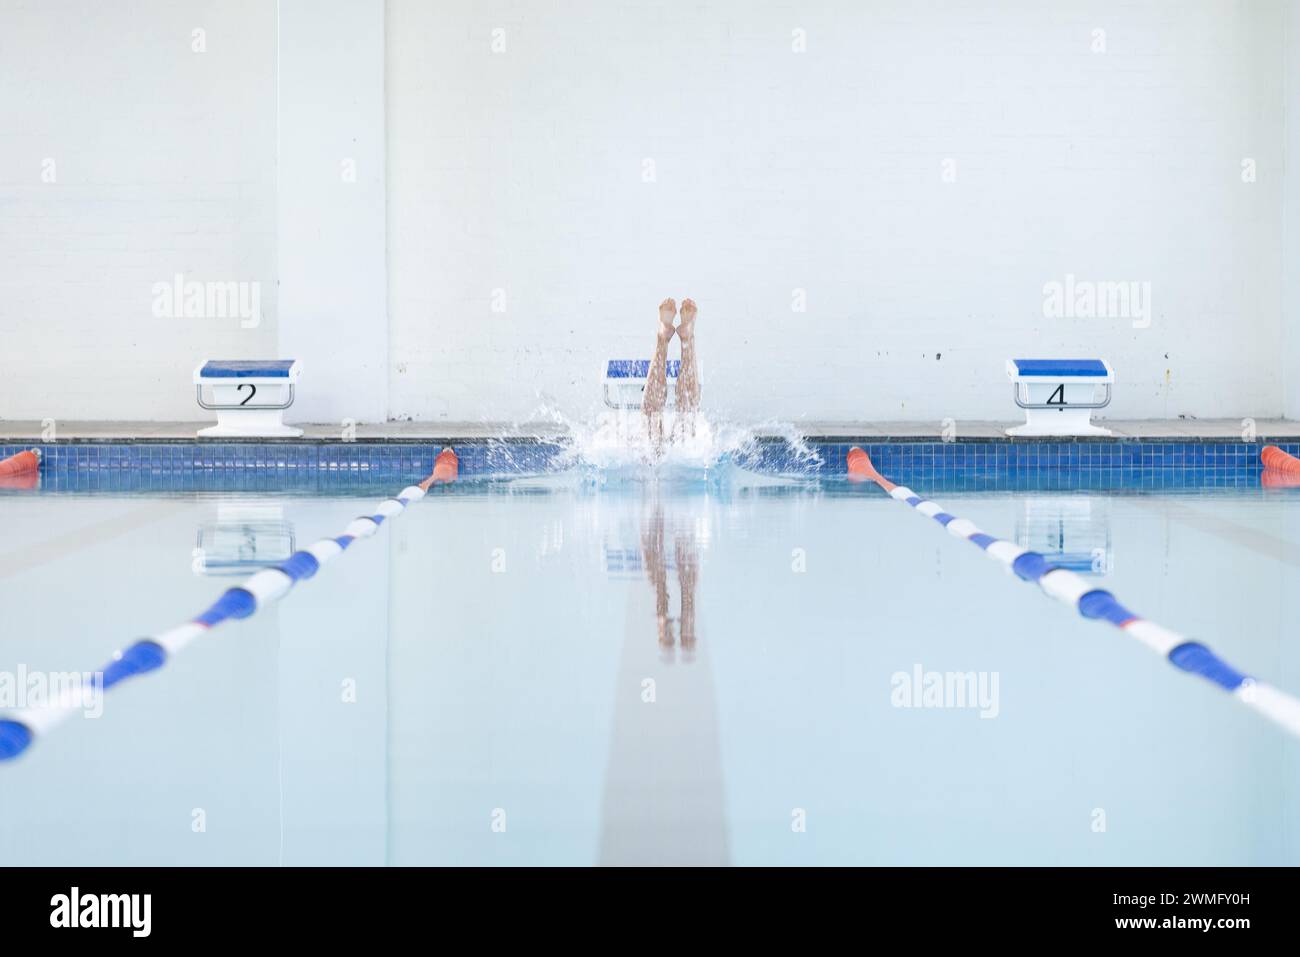 A swimmer dives into a pool at a competitive swimming event Stock Photo